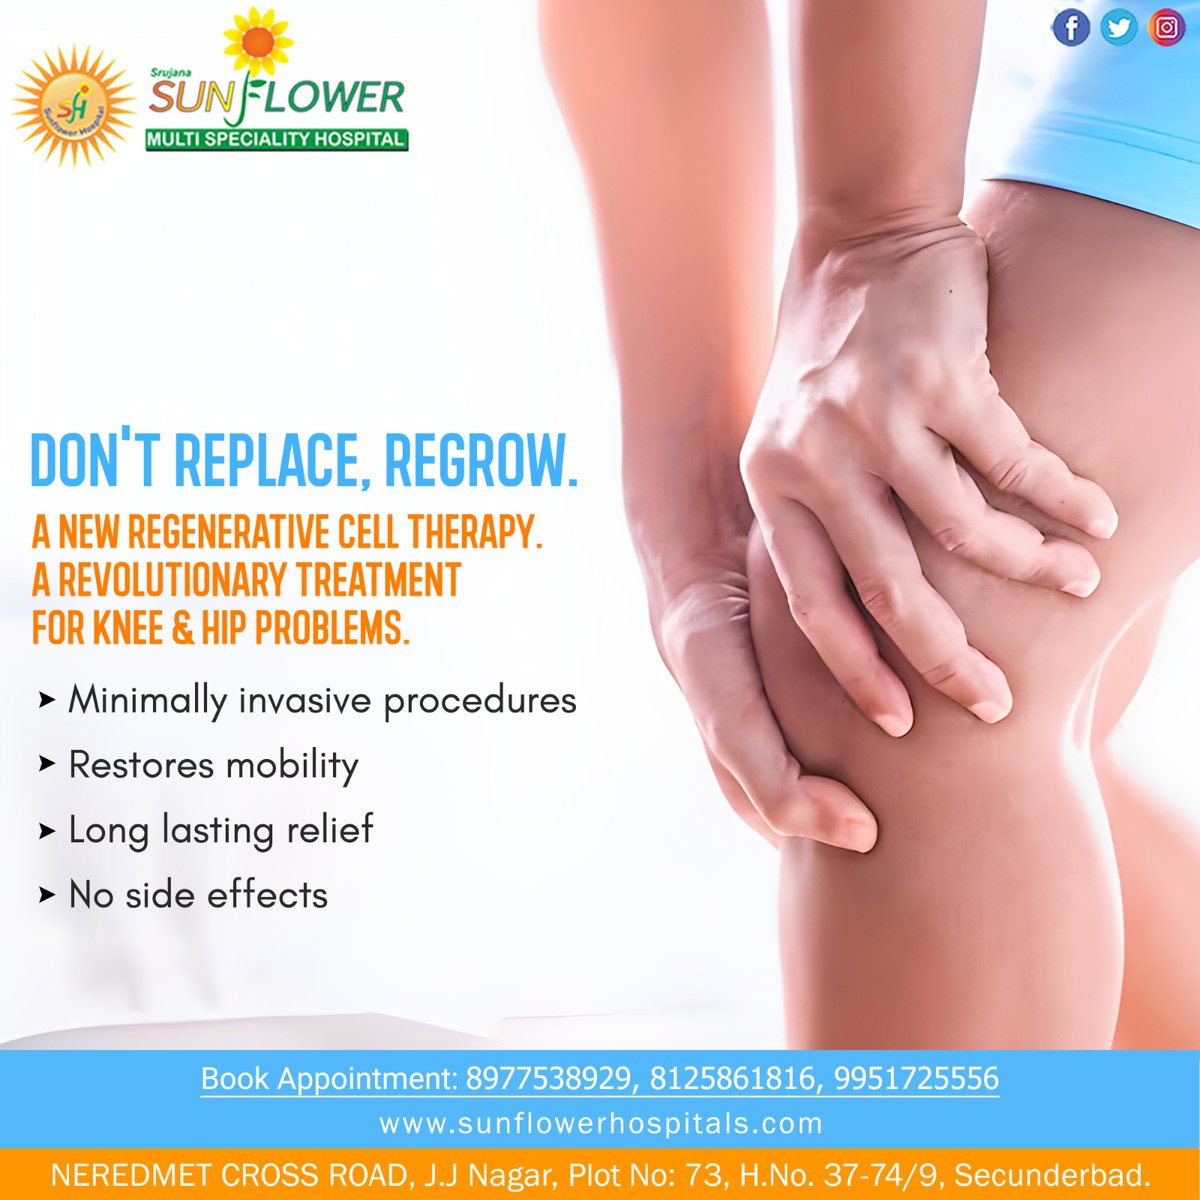 Revolutionize #knee & #hip care with #regenerativecelltherapy! Say goodbye to #replacements; welcome natural healing. Experience the future of #orthopedic treatment.

For Appointment 
089775 38929

For more visit
sunflowerhospitals.com